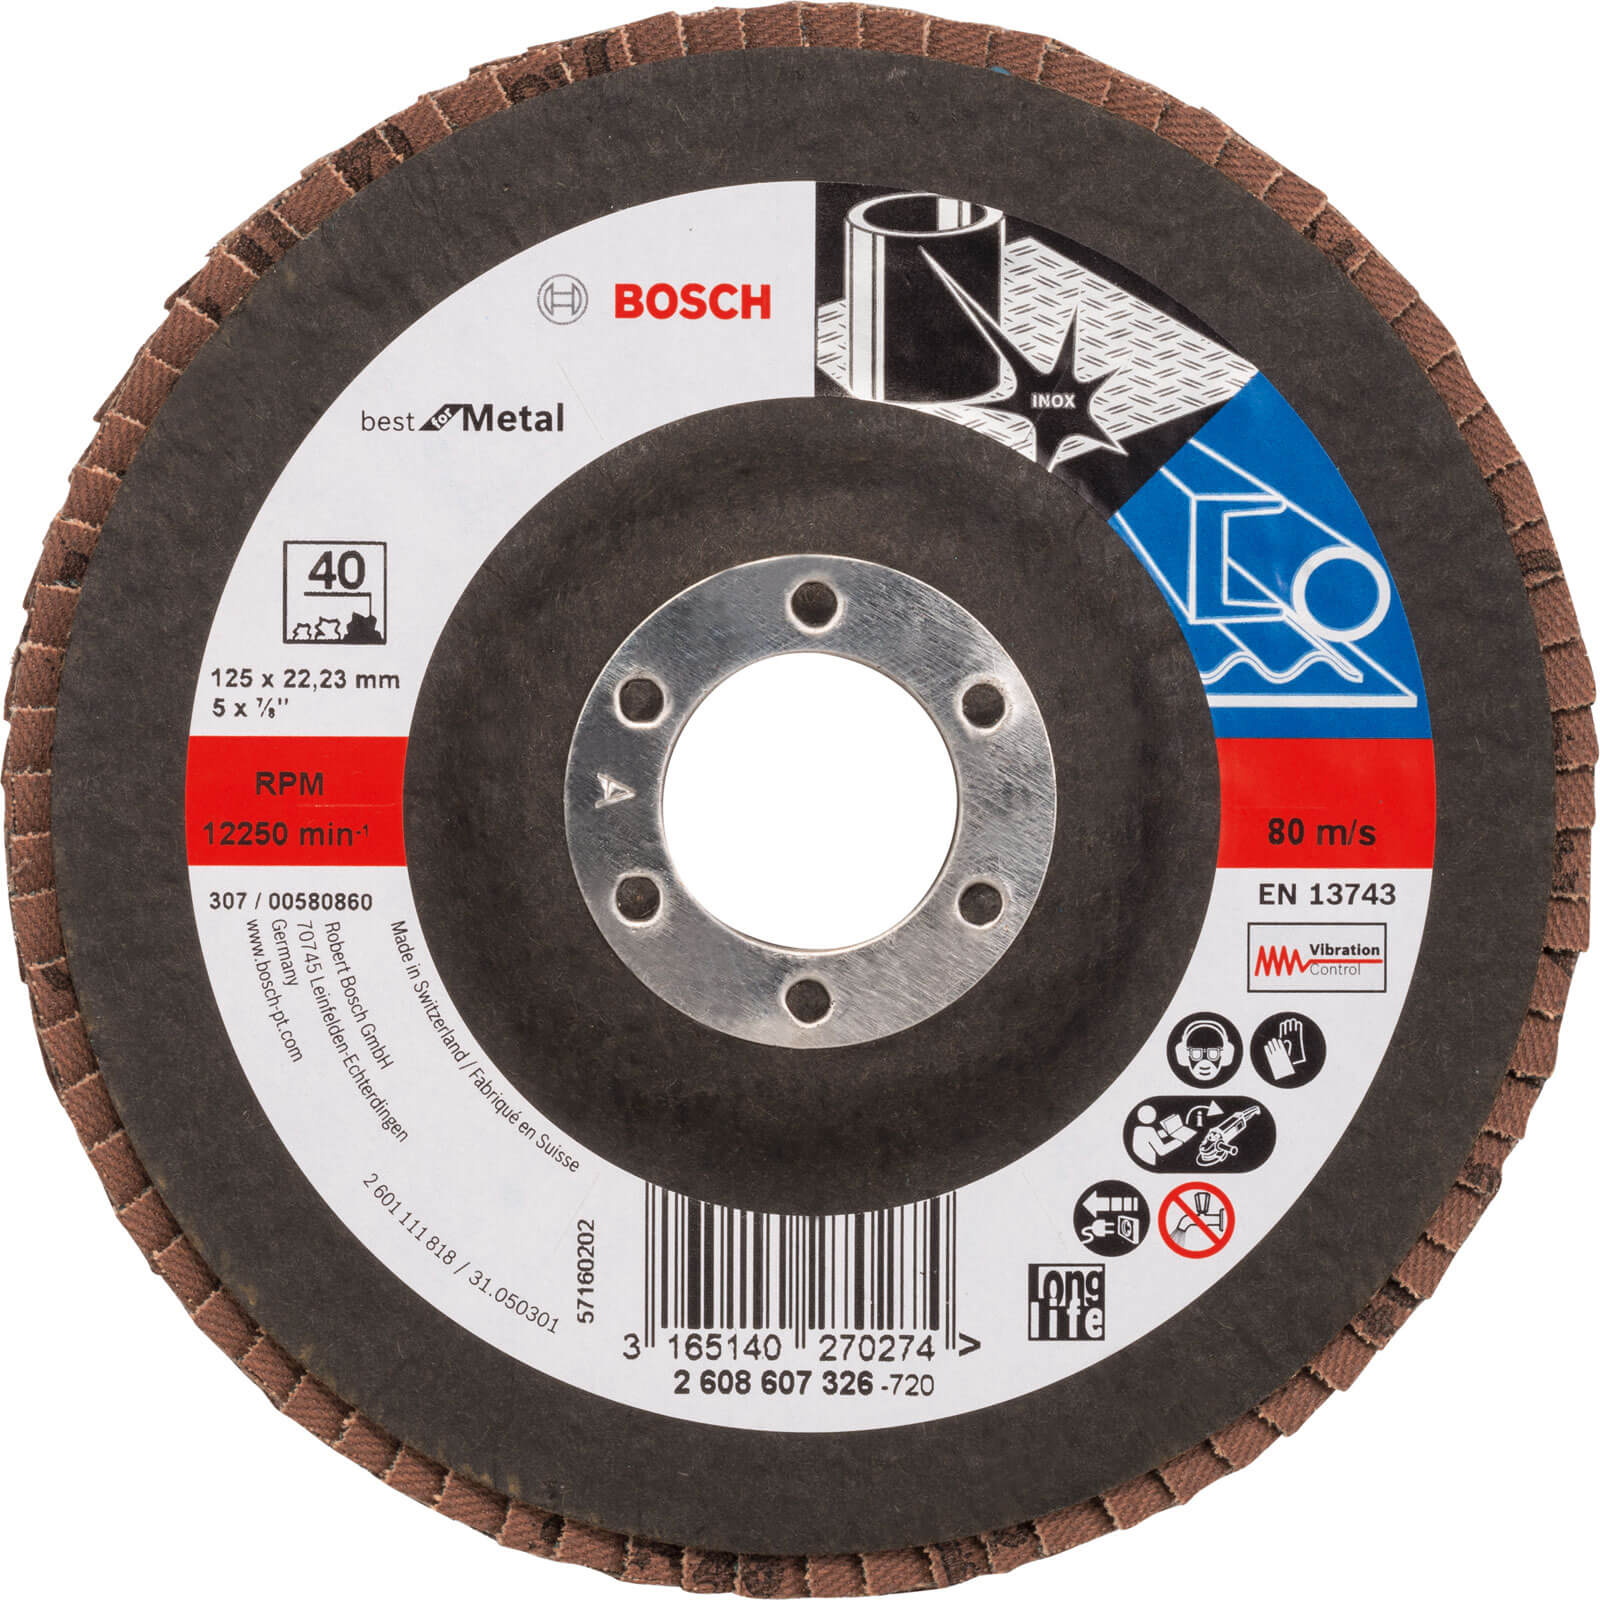 Bosch X571 Best for Metal Straight Flap Disc 125mm 40g Pack of 1